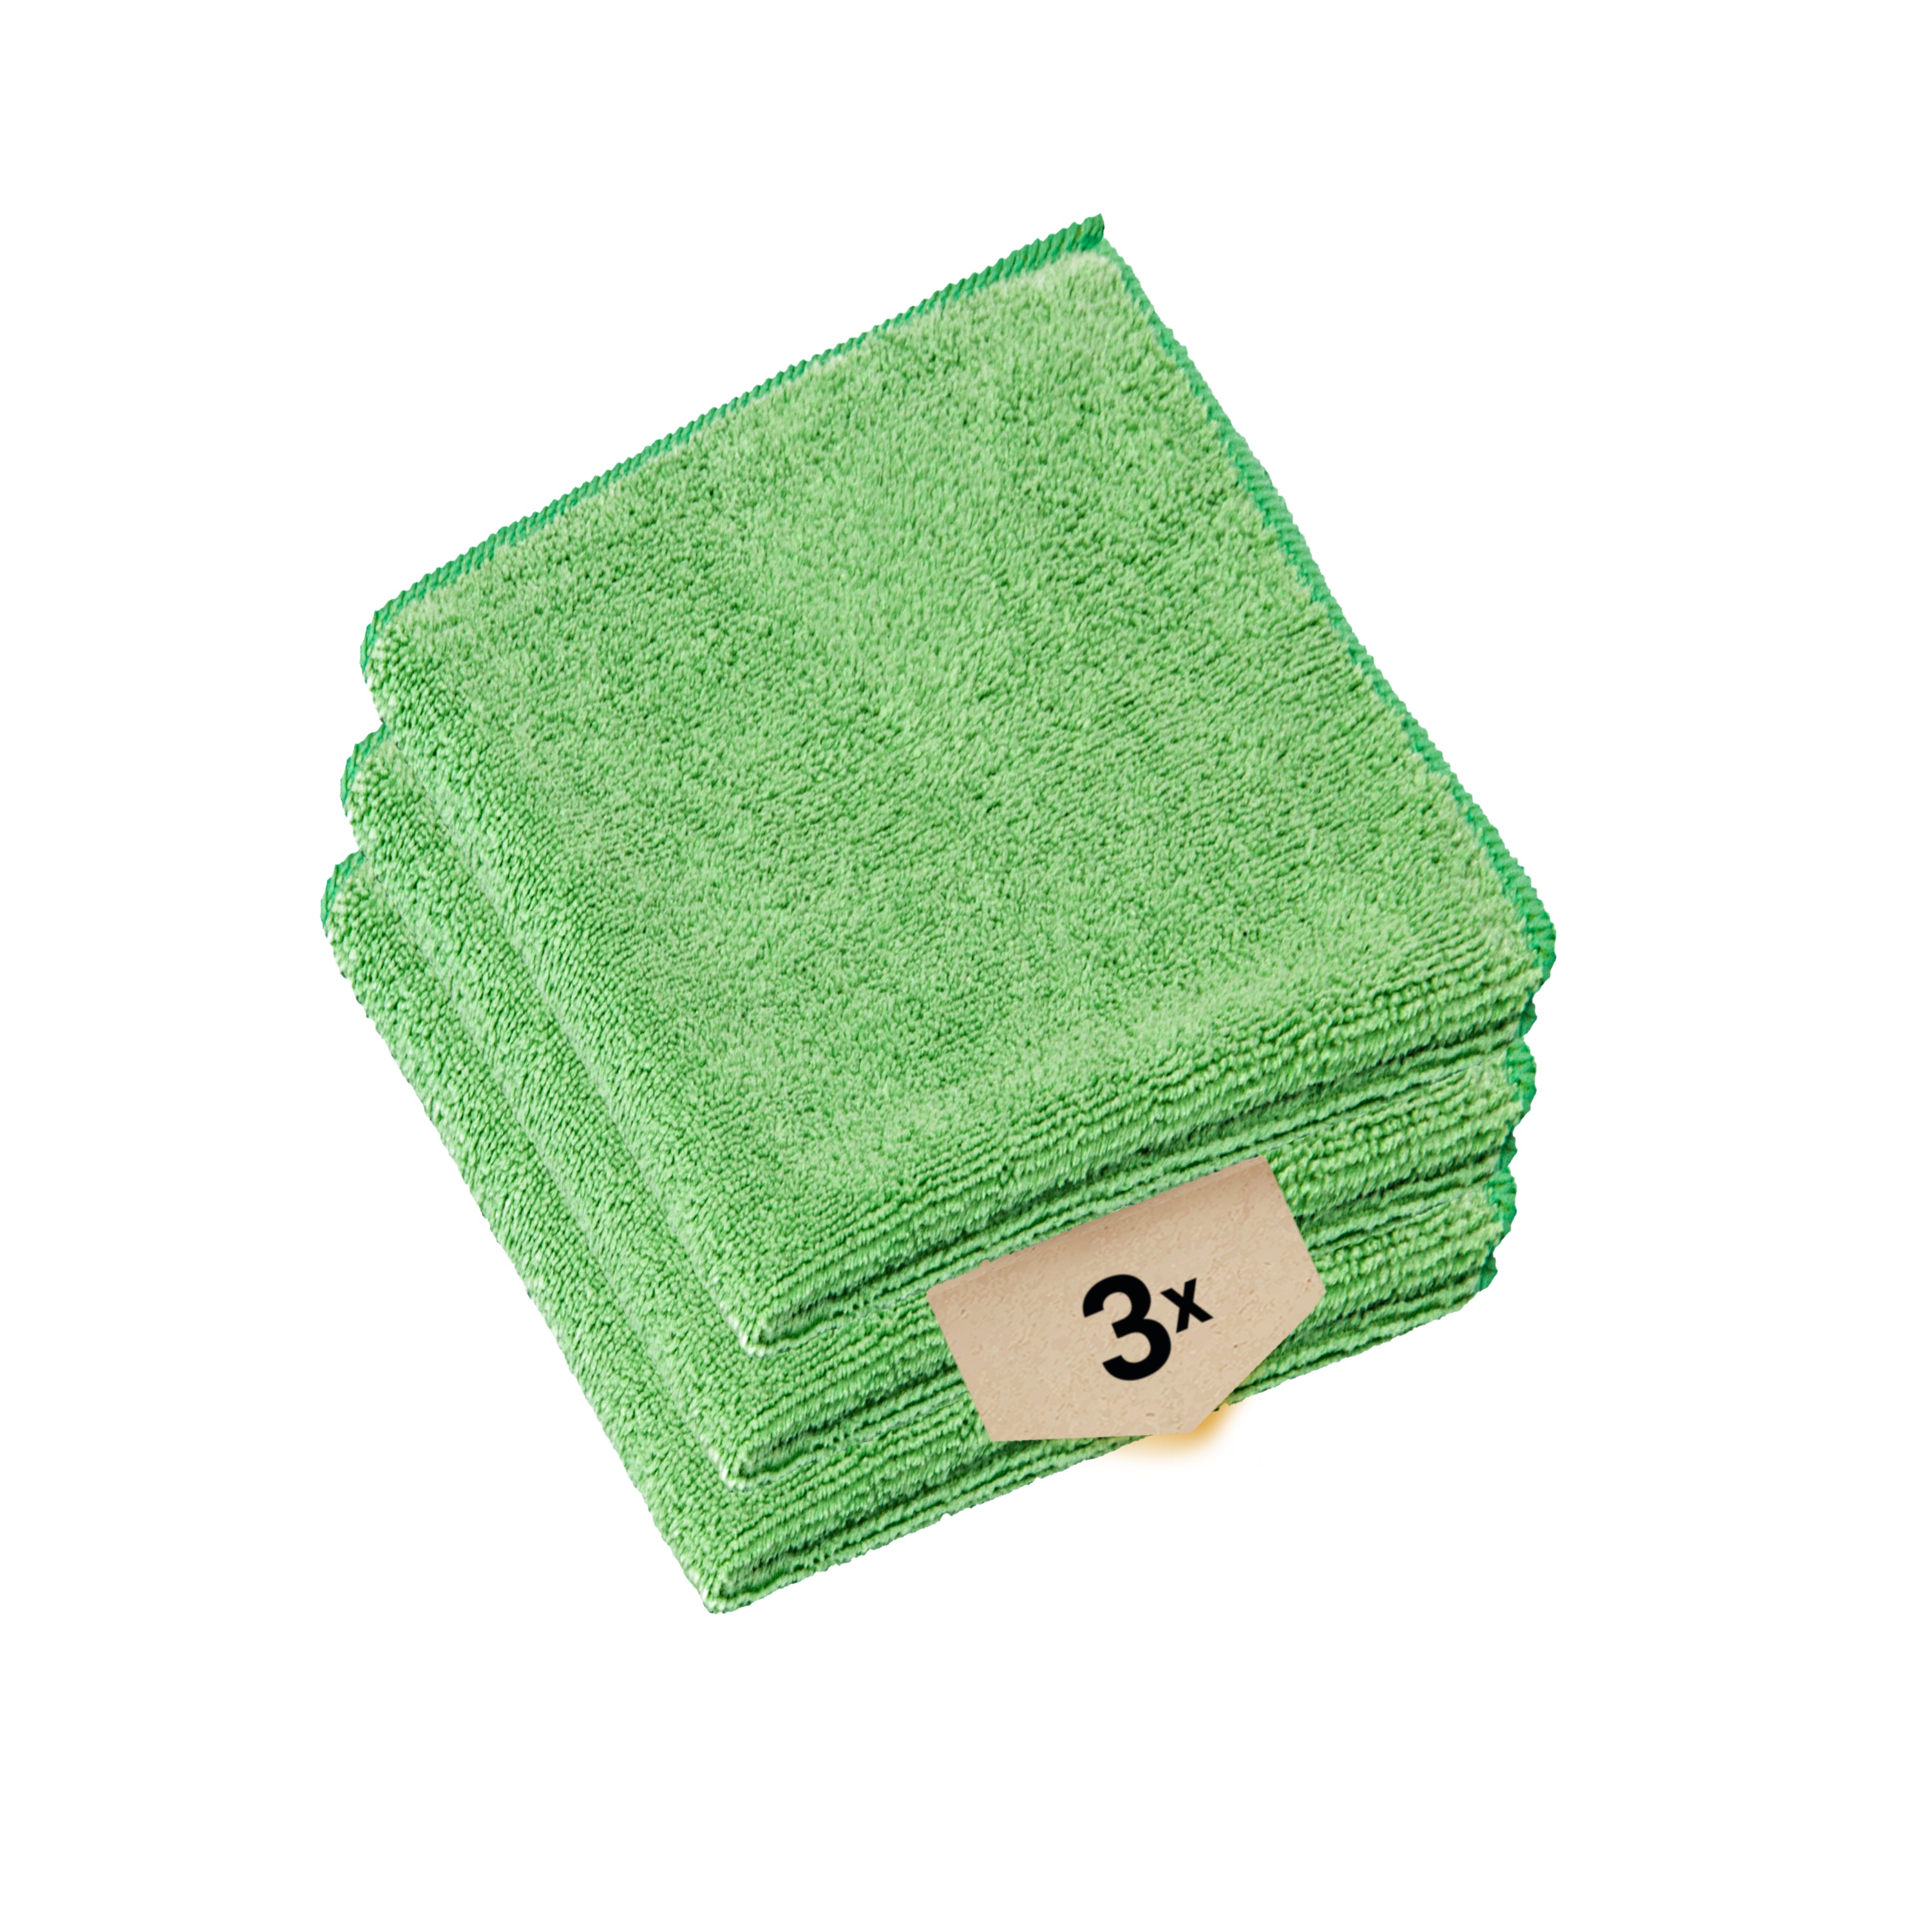 Microfiber cloth, cleaning cloth set for fine cleaning and care